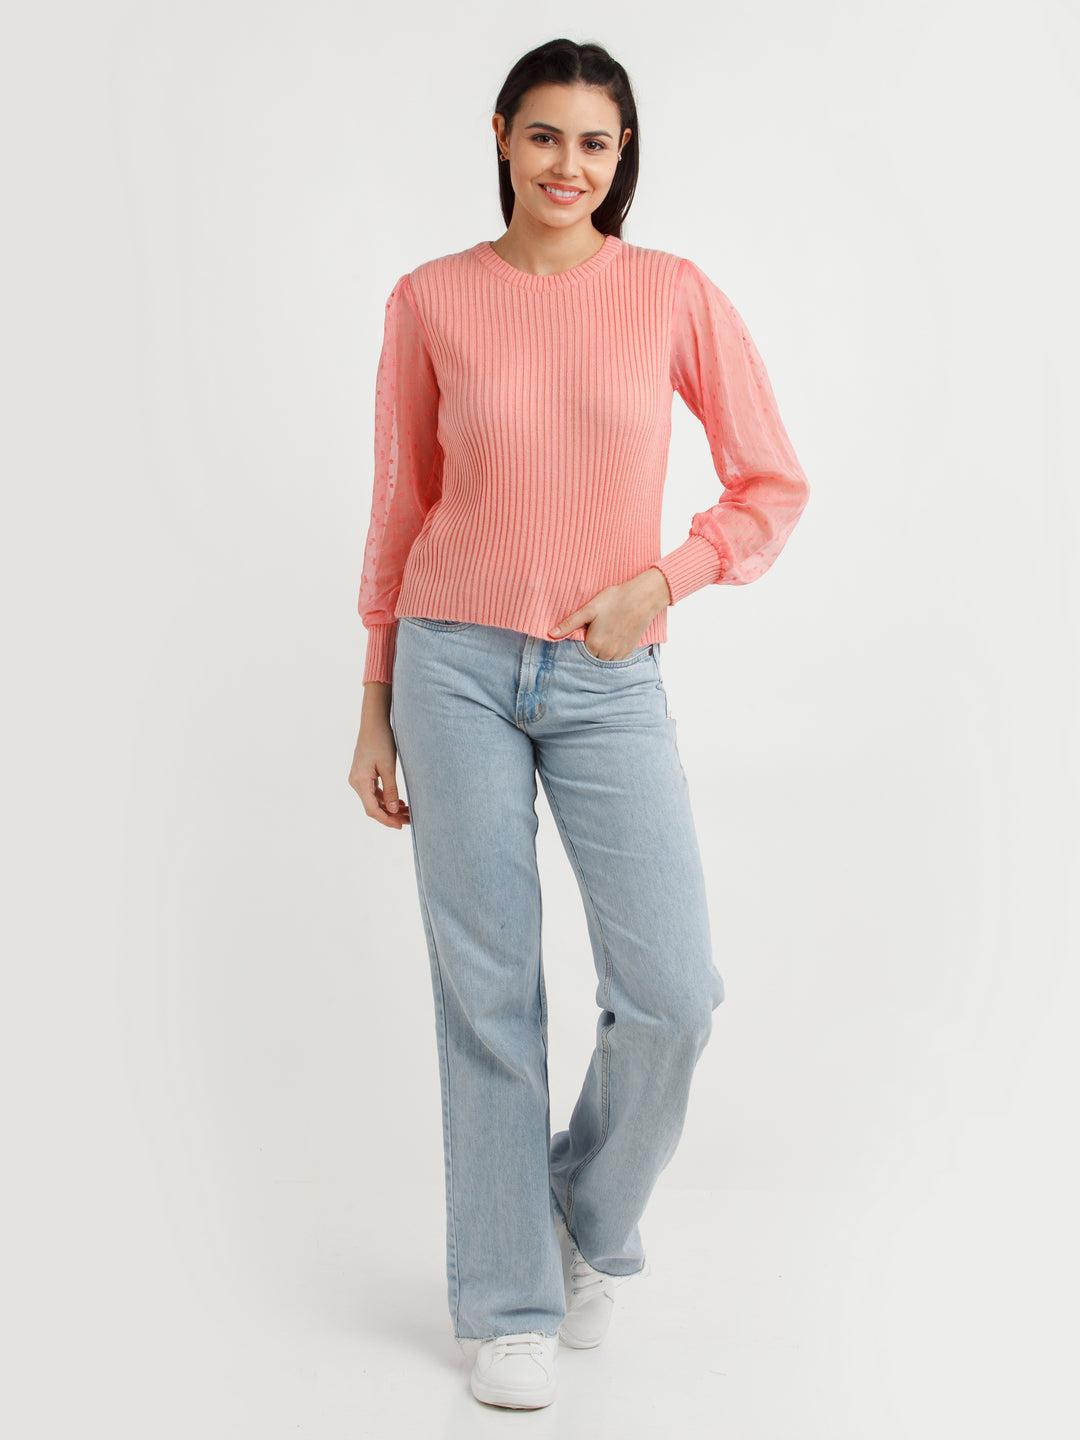 Coral Solid Sweater For Women By Zink London